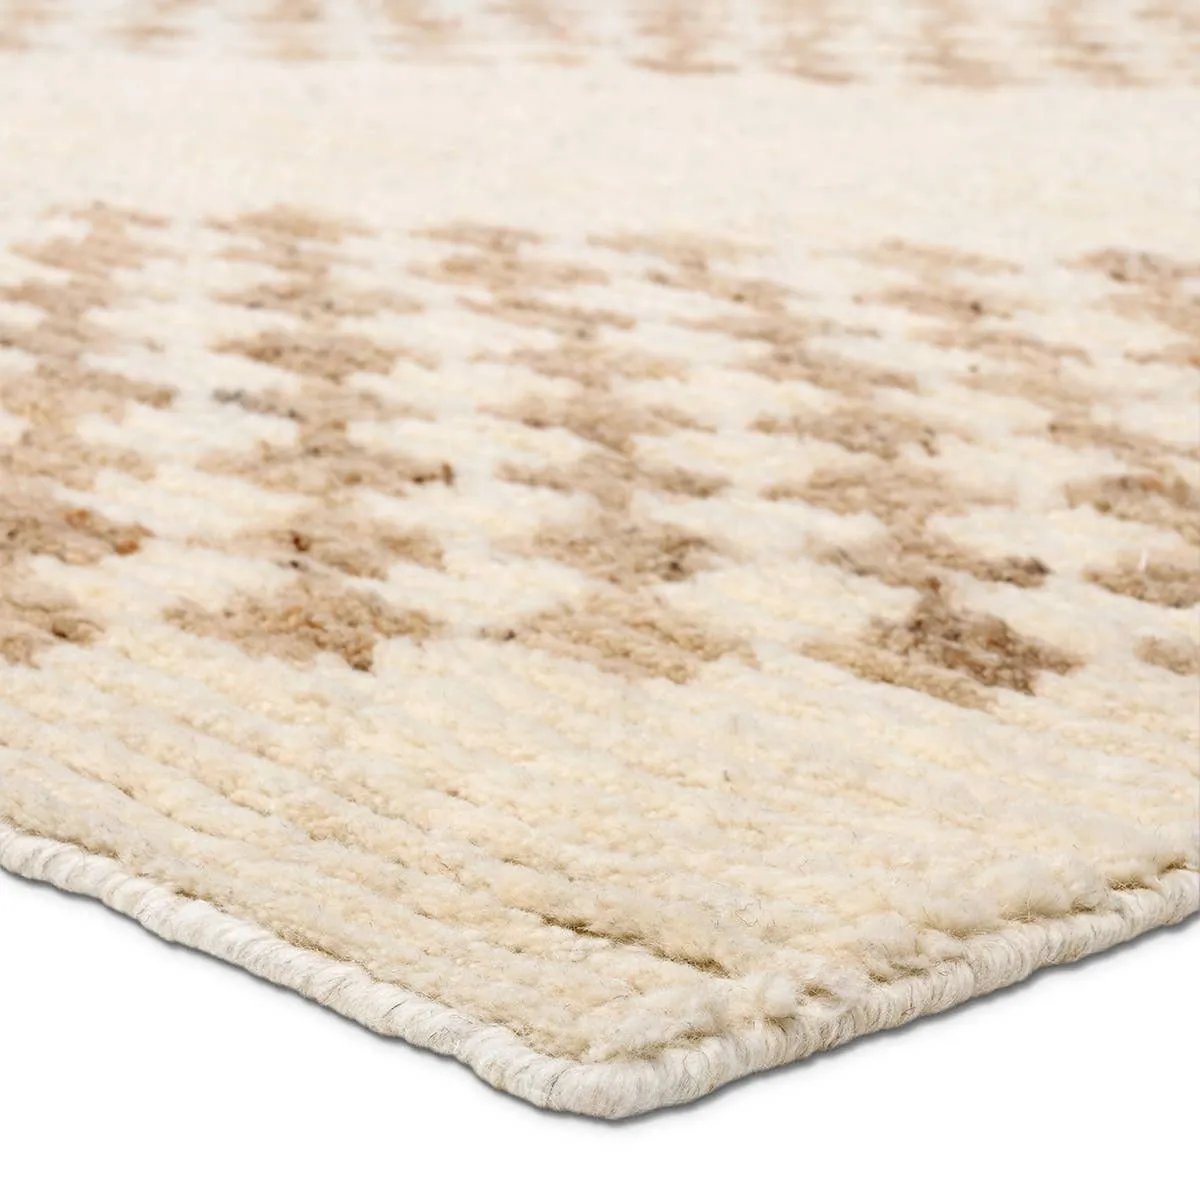 A stunning array of globally inspired designs in neutral tones define the handknotted Merzouga by Heja Home Sarenthia. The Moroccan-inspired Sarenthia design showcases several checkered diamonds in cream and taupe tones. The 100% wool pile is soft underfoot and inherently stain-resistant. Amethyst Home provides interior design, new home construction design consulting, vintage area rugs, and lighting in the Kansas City metro area.